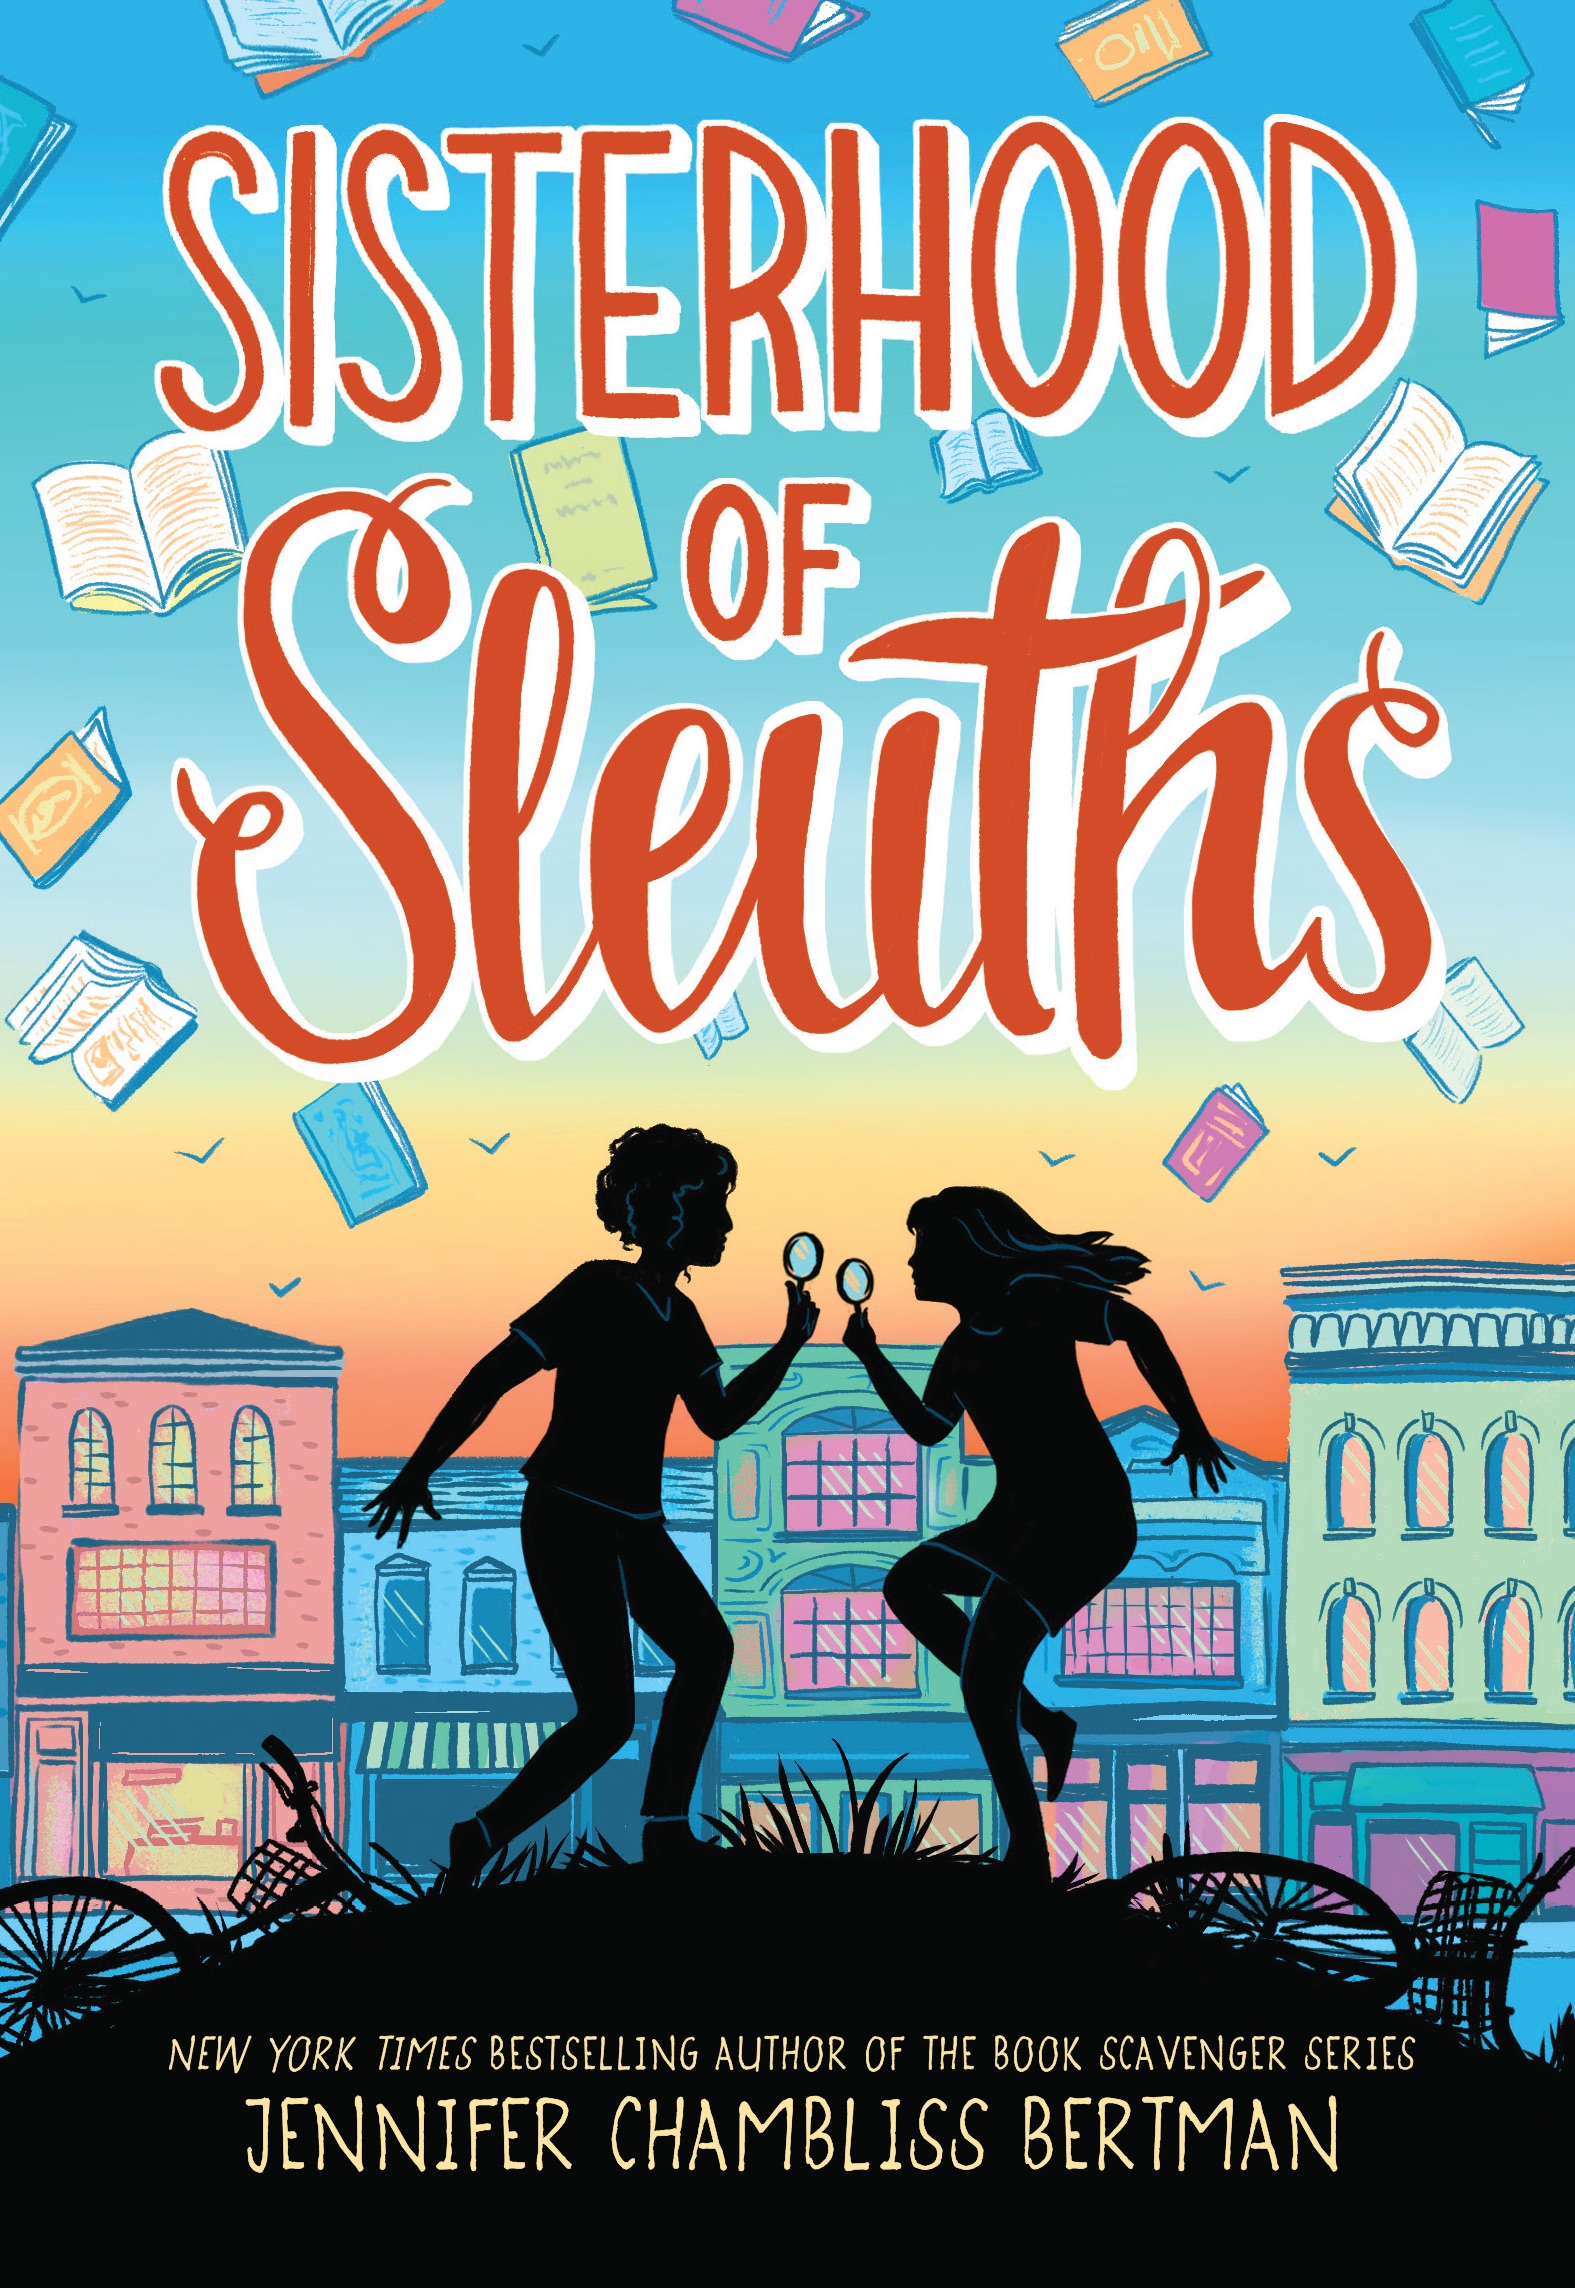 Author Chat With Jennifer Chambliss Bertman (Sisterhood of Sleuths), Plus Giveaway! ~ US Only!